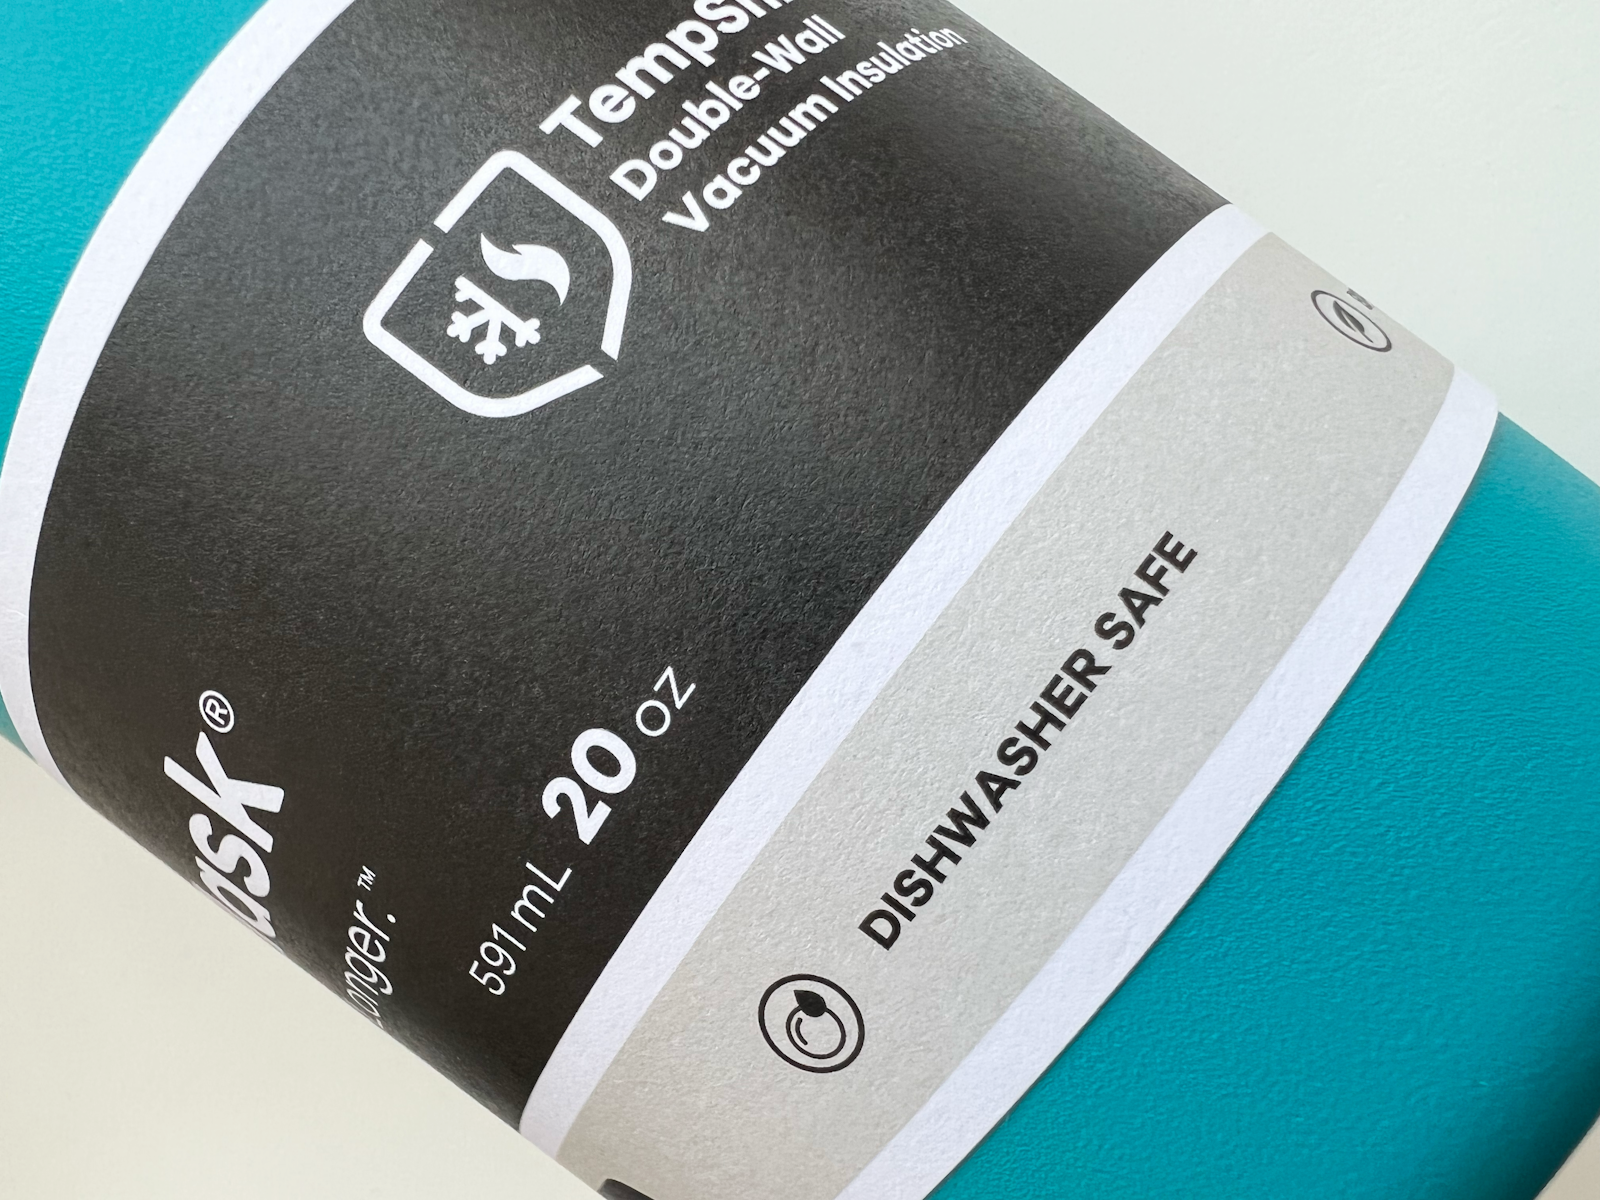 The Hydro Flask brand design label packaging on closeup of green flask.